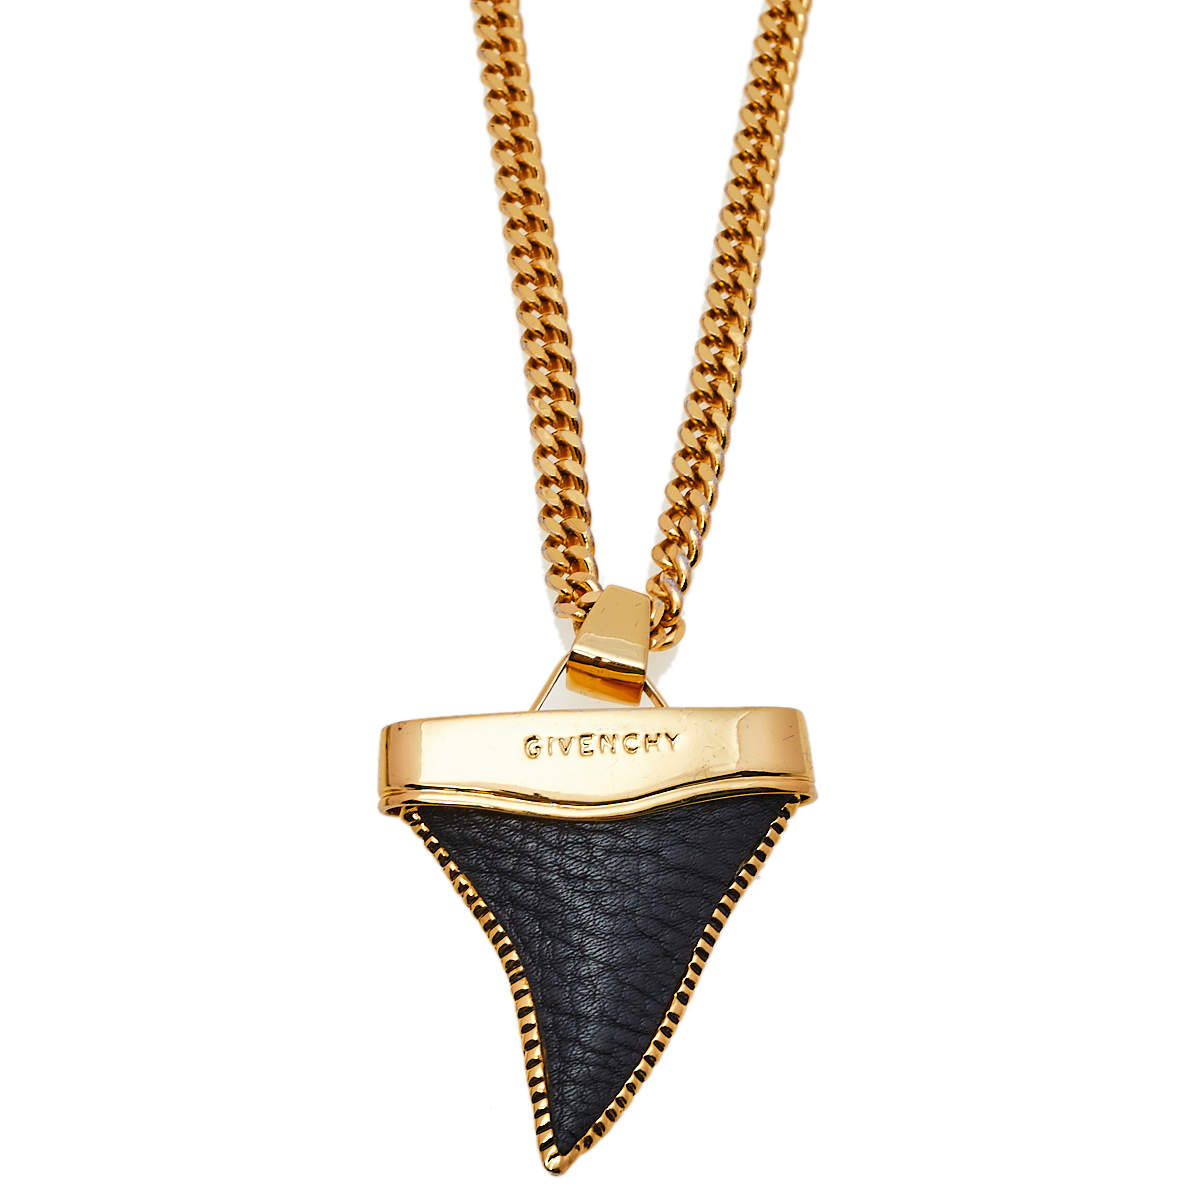 Givenchy Black Leather Shark Tooth Pendant Necklace